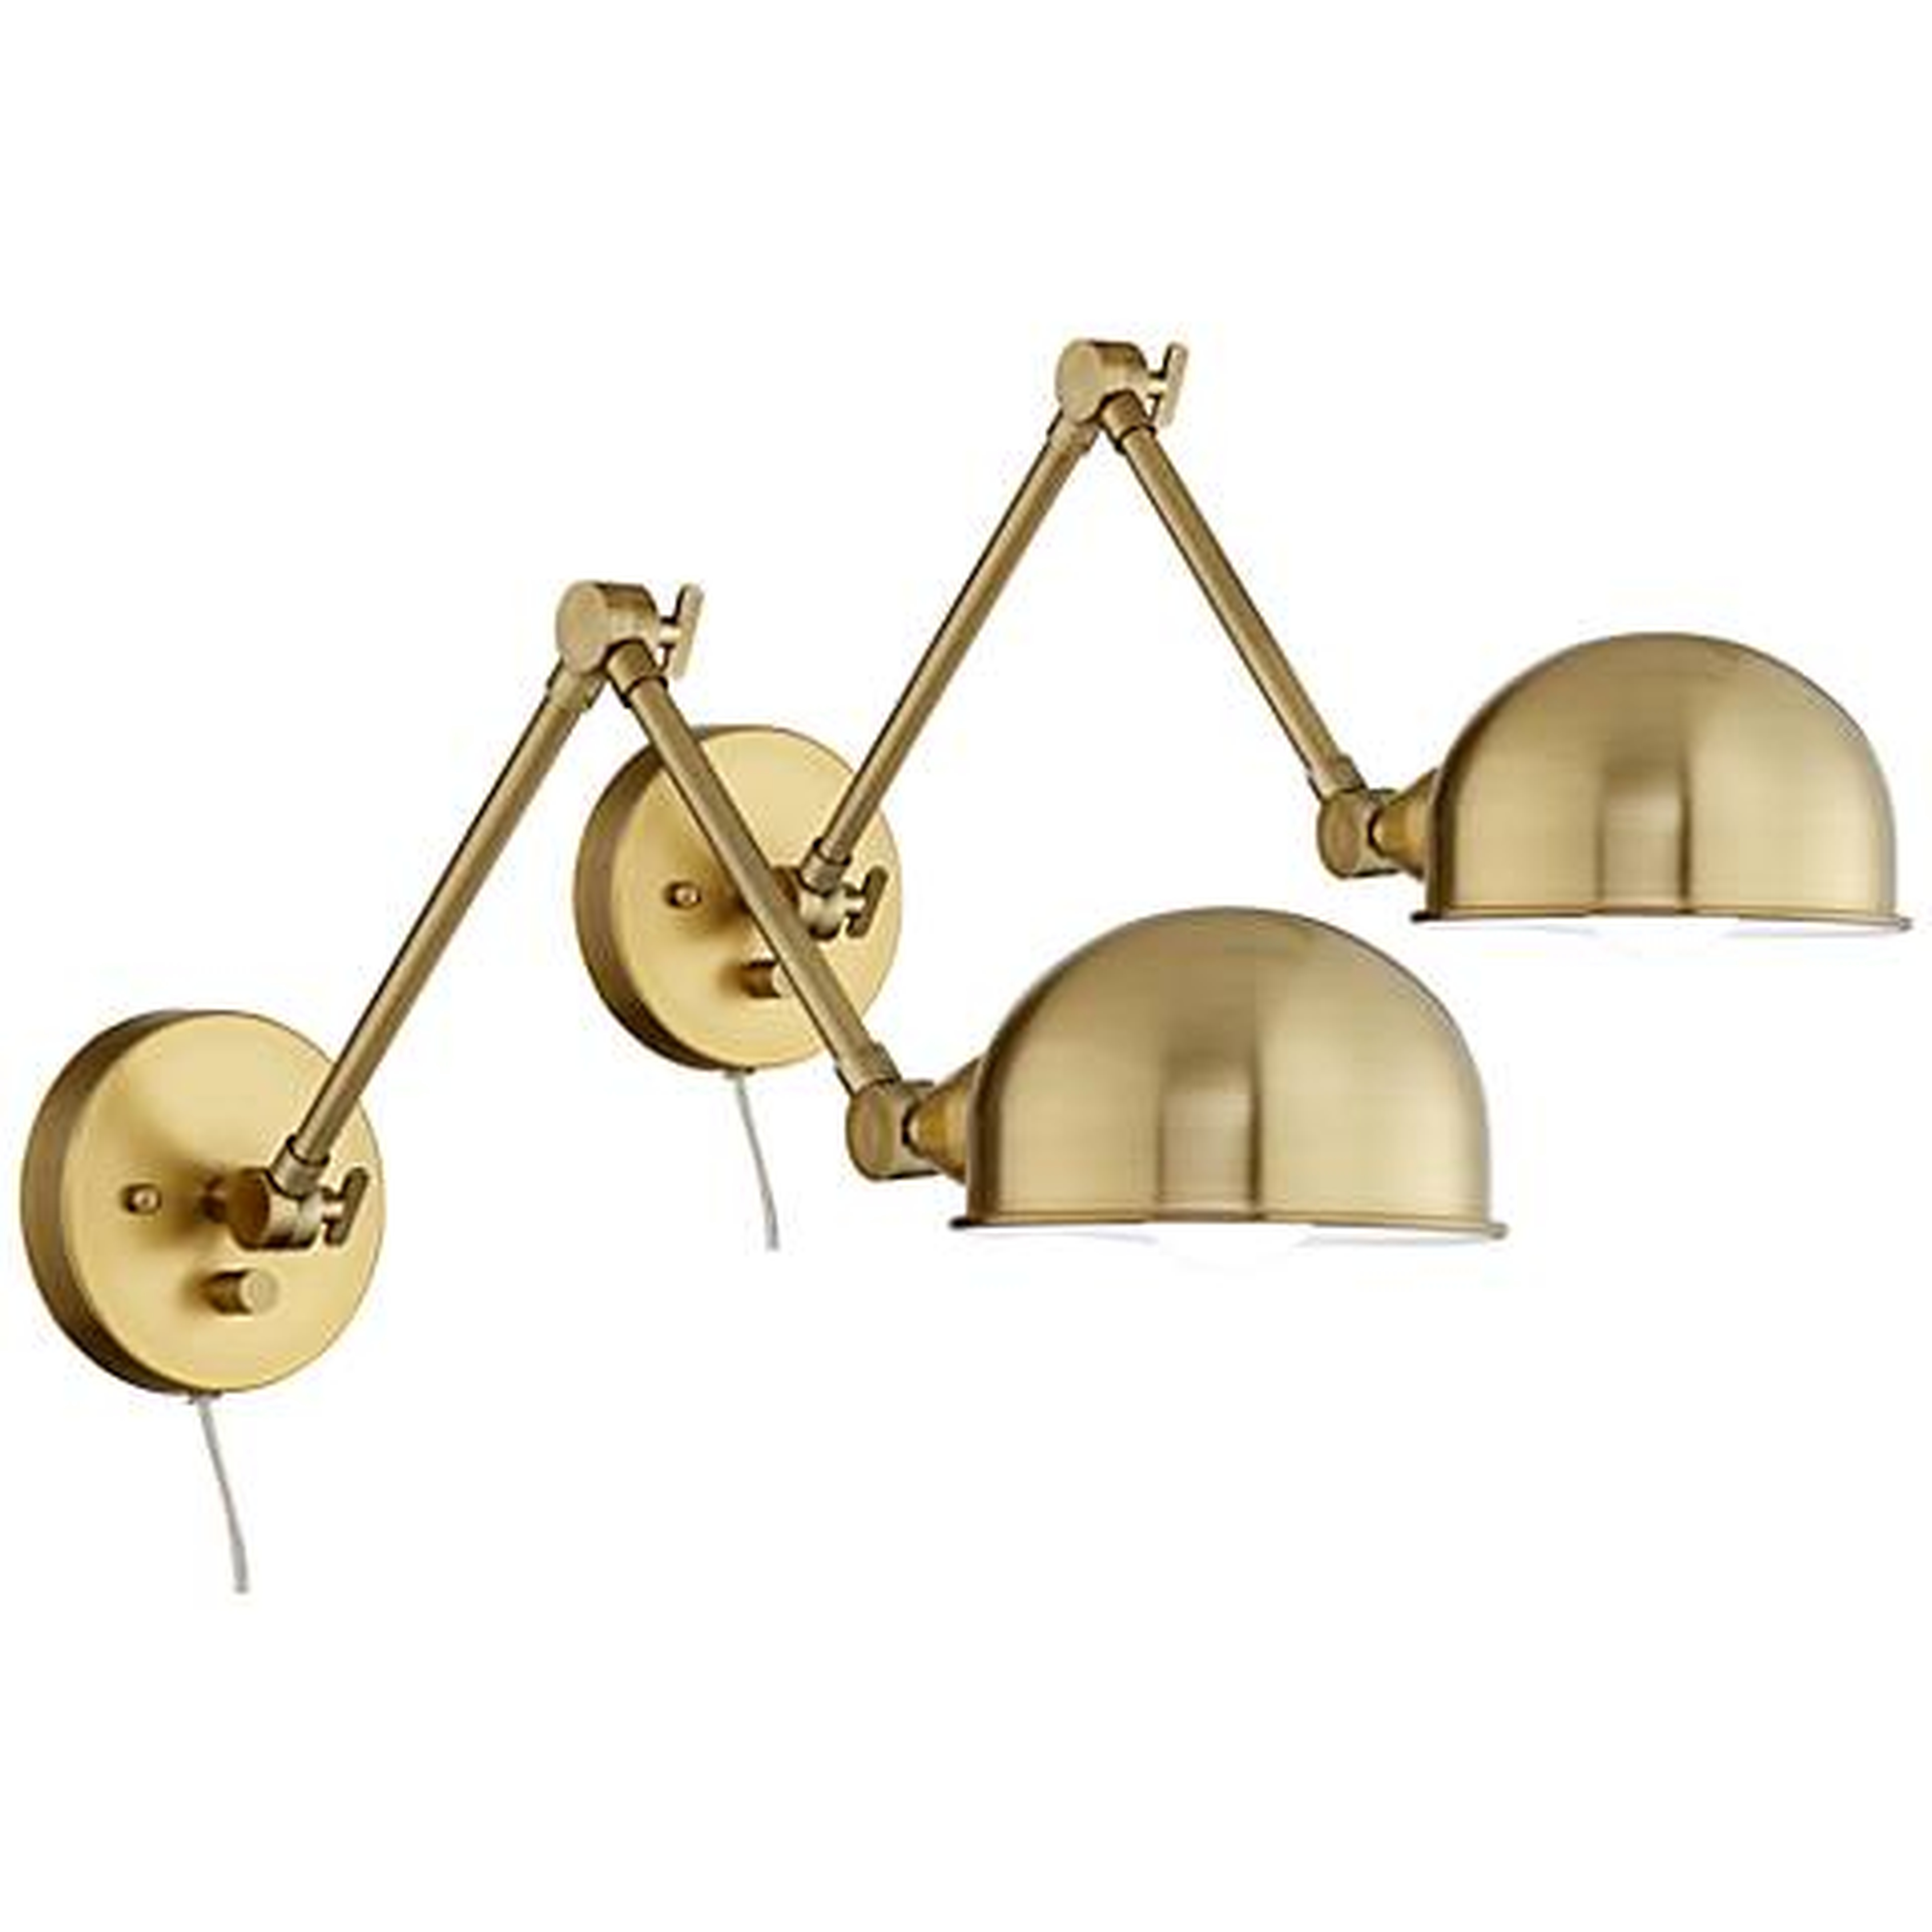 Somers Antique Brass LED Swing Arm Wall Lamp Set of 2 - Lamps Plus